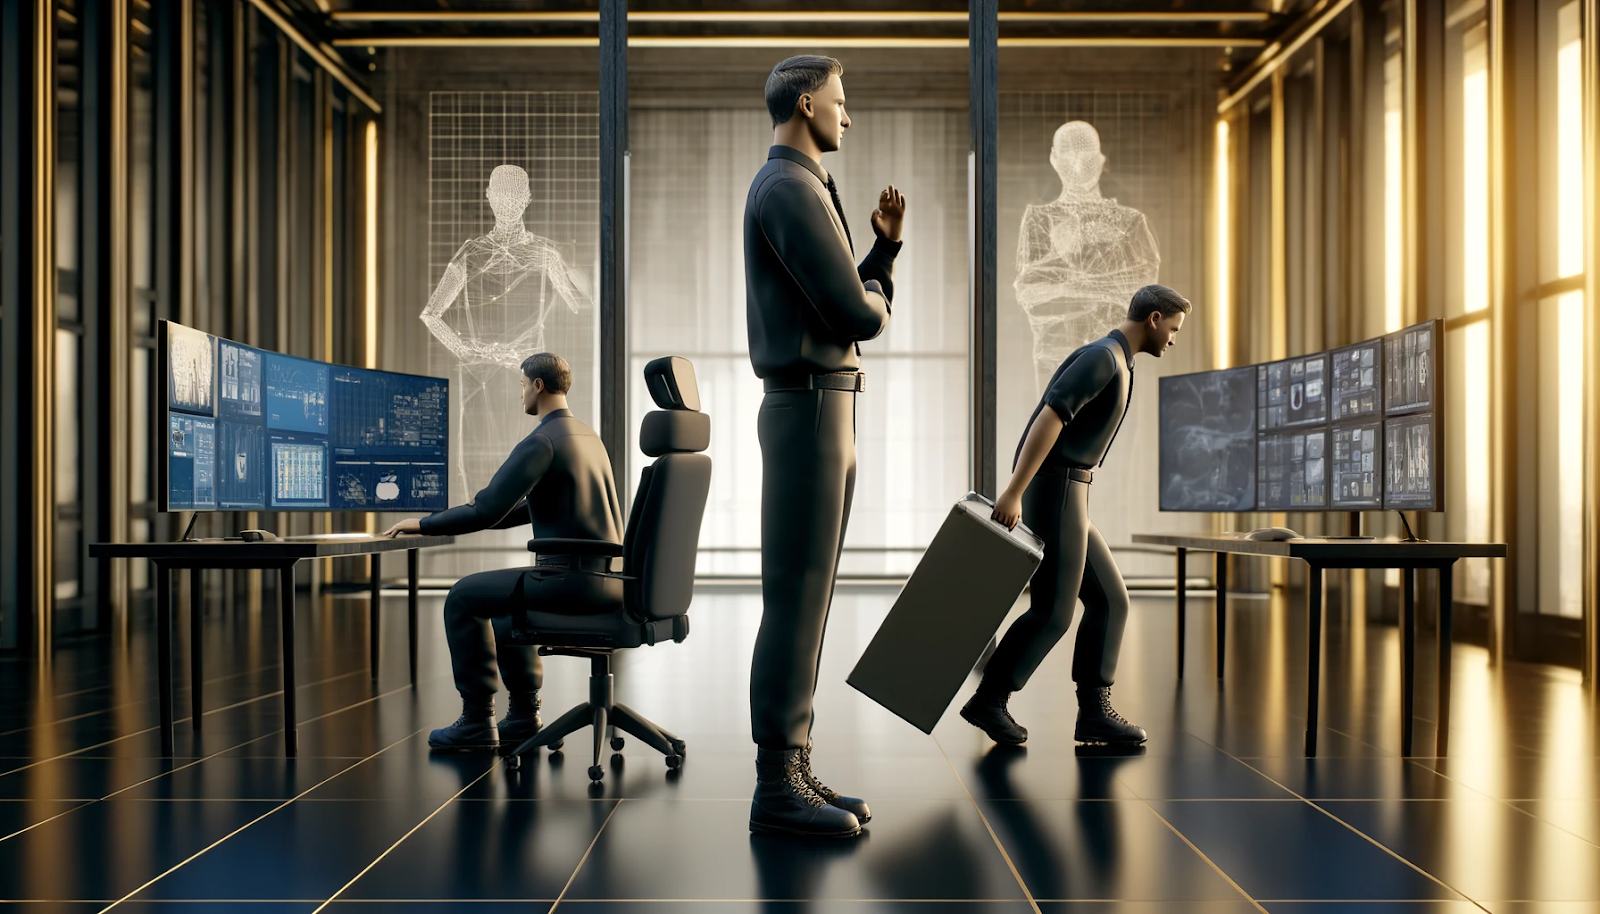 A photorealistic representation of ergonomic best practices for security personnel.  